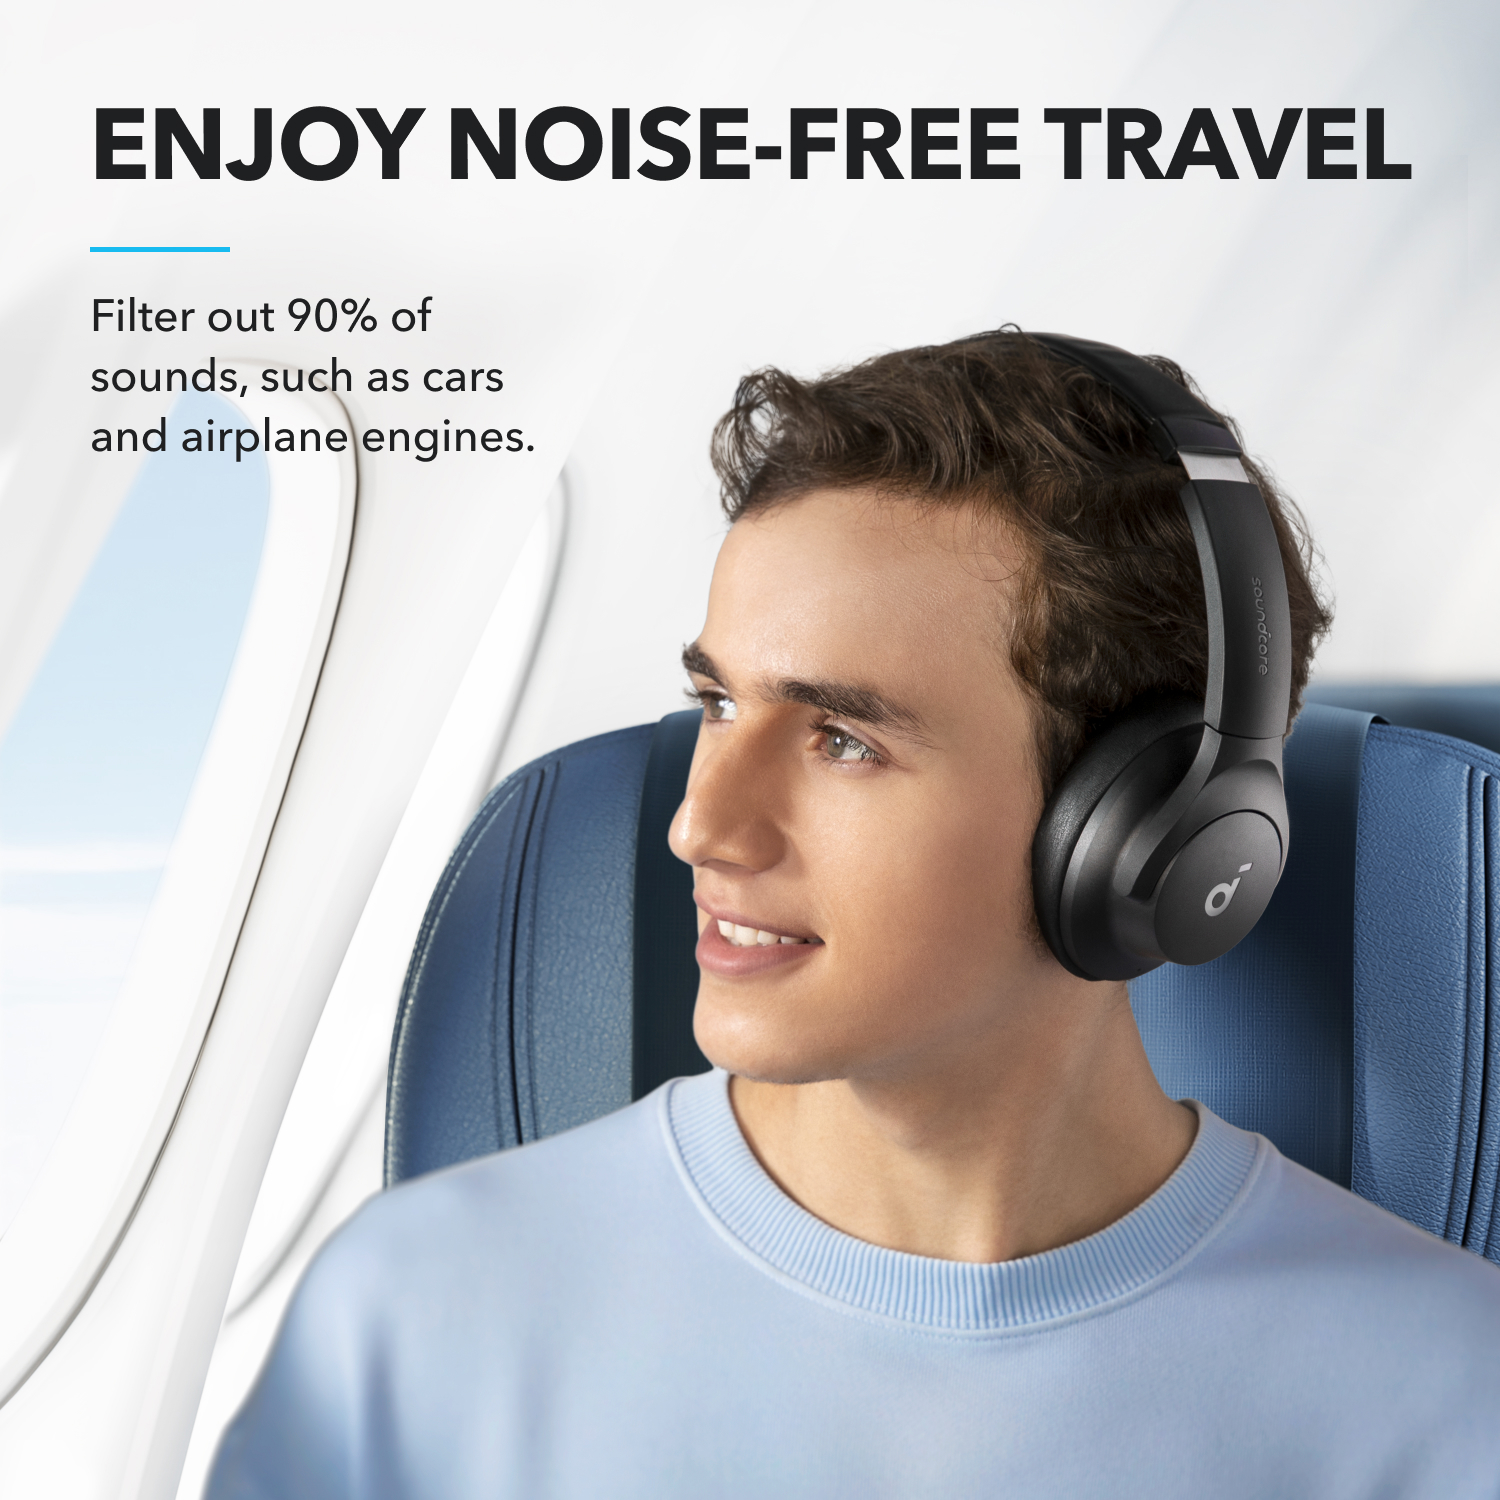 Soundcore by Anker Q20i Hybrid ANC Headphones, Wireless Over-Ear Bluetooth, 40H Long ANC Playtime, Hi-Res Audio, Big Bass, Customize via an App, Transparency Mode, Ideal for Travel-A3004